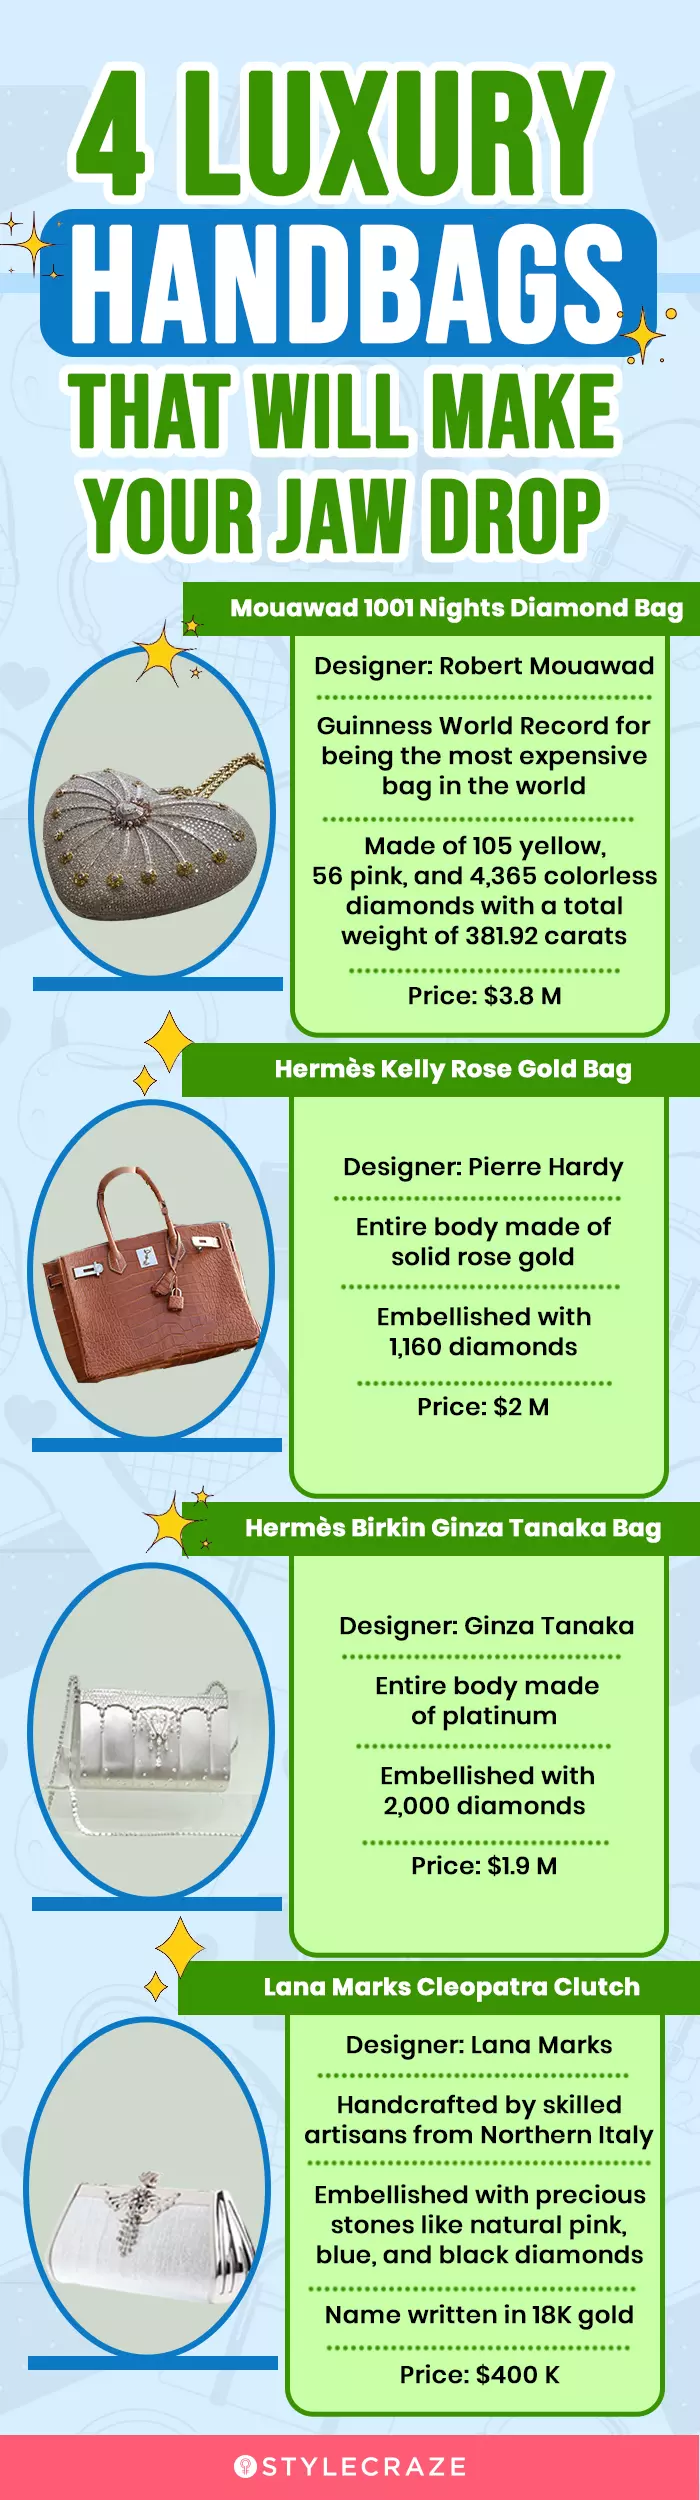 4 epic luxurious handbags that can make your jaws drop (infographic)